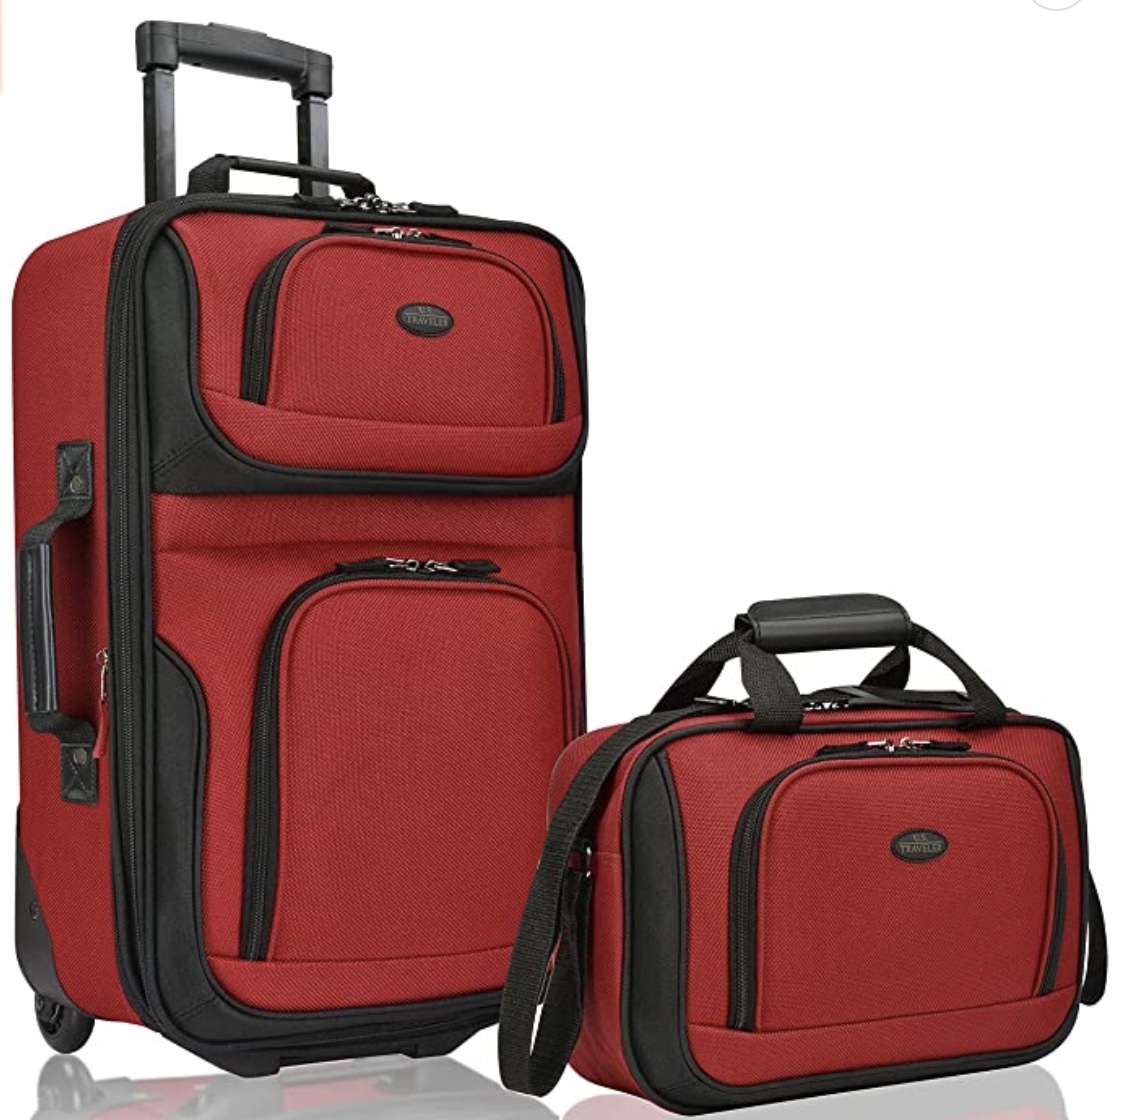 How to pick the perfect carry-on luggage - North Shore News